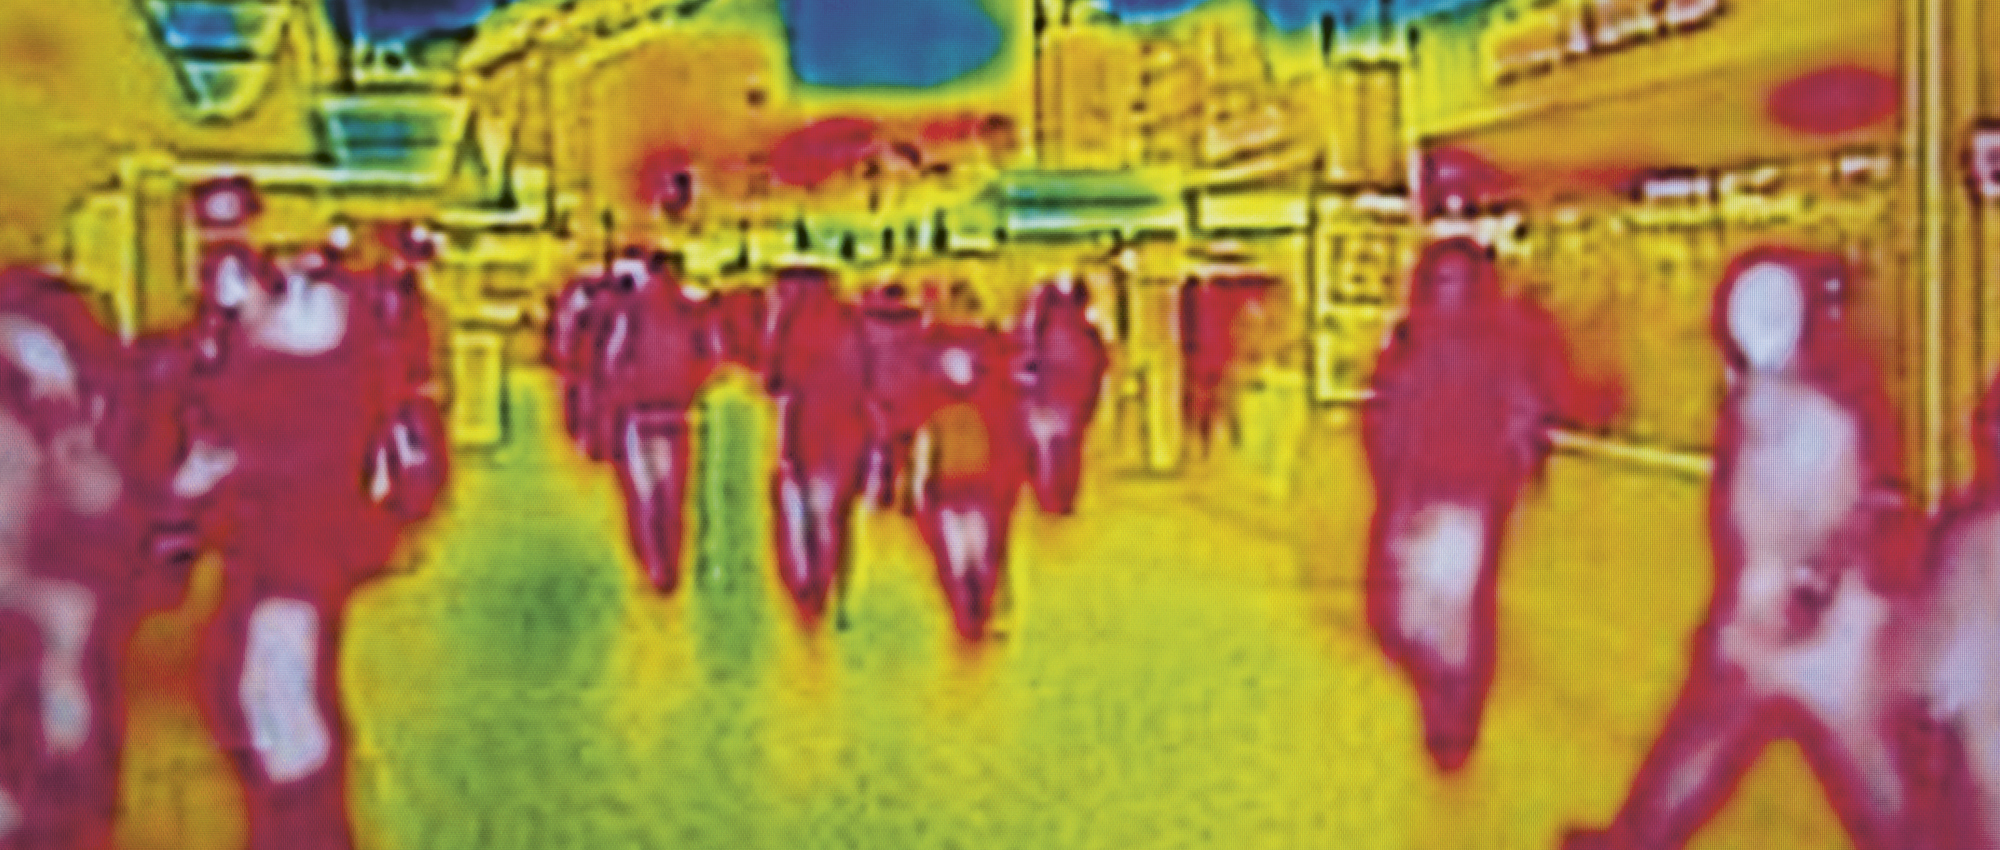 Thermal image of passers-by on a street. Copyright: iStock/ivansmuk